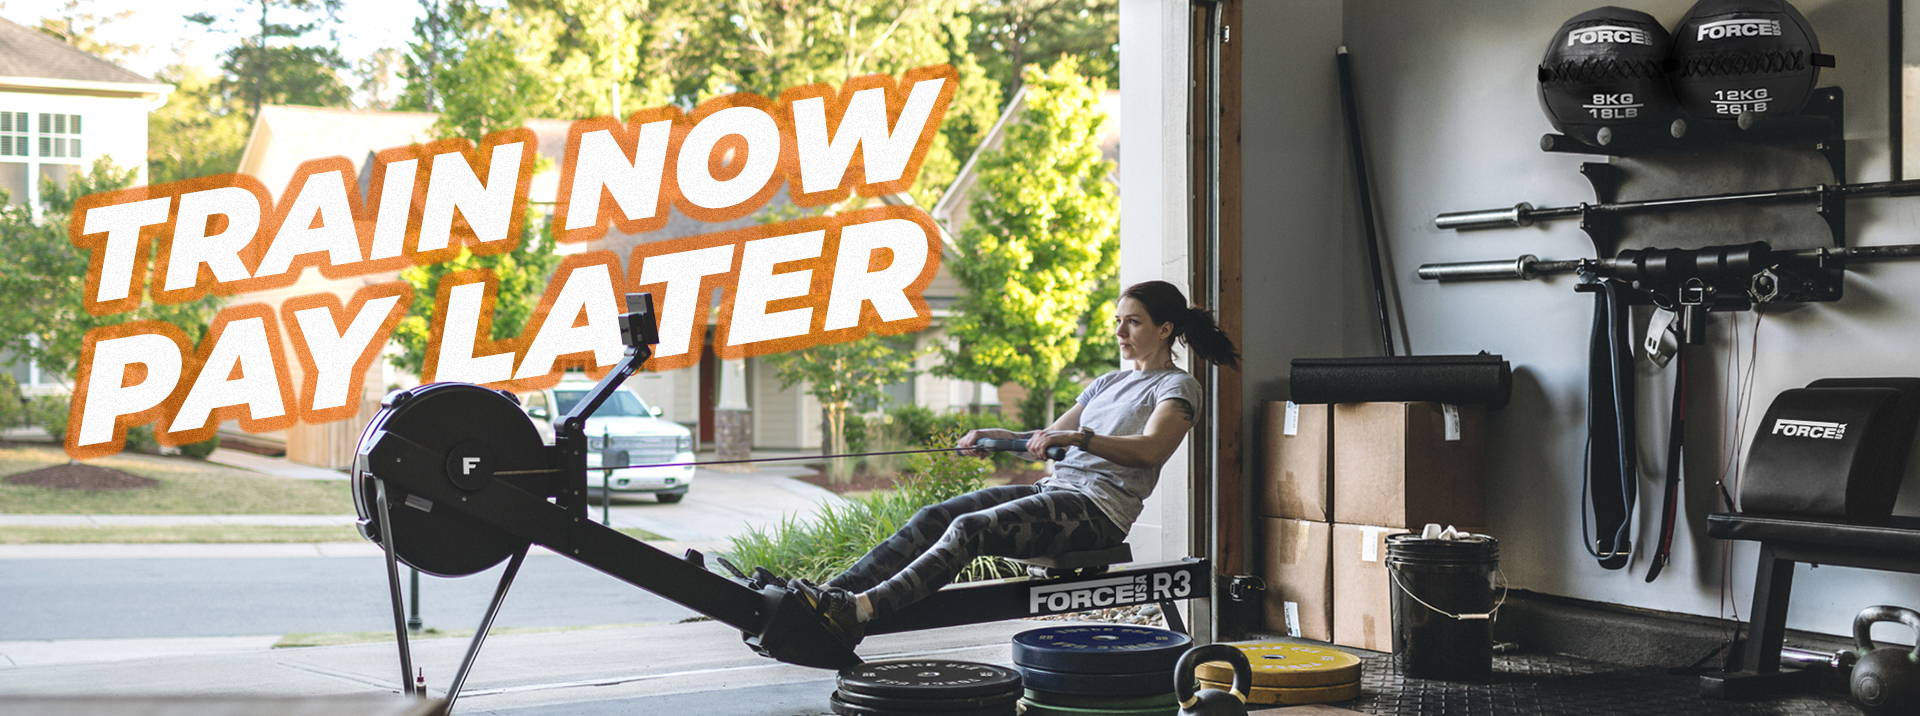 Home gym with equipment and 'TRAIN NOW PAY LATER' offer highlighted, featuring a focused woman using a rowing machine in a garage setting.